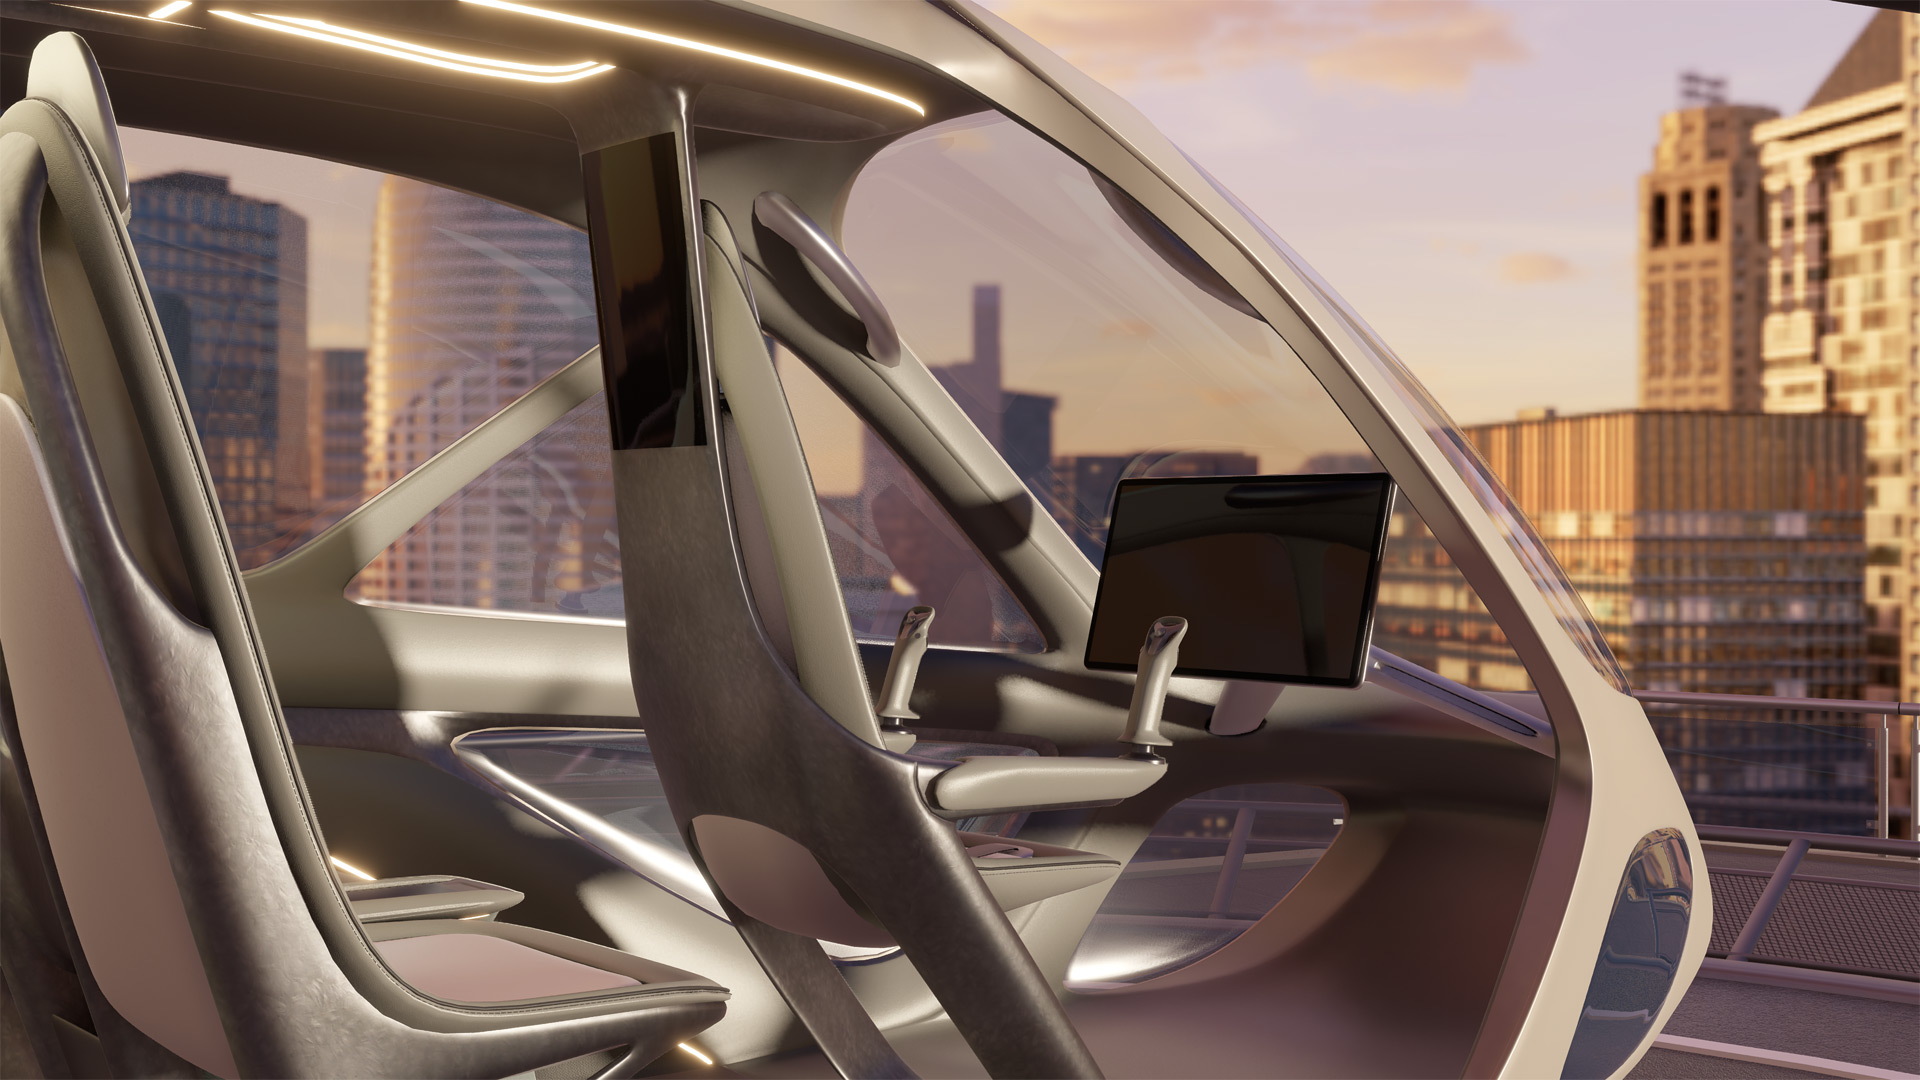 Supernal flying taxi cabin concept